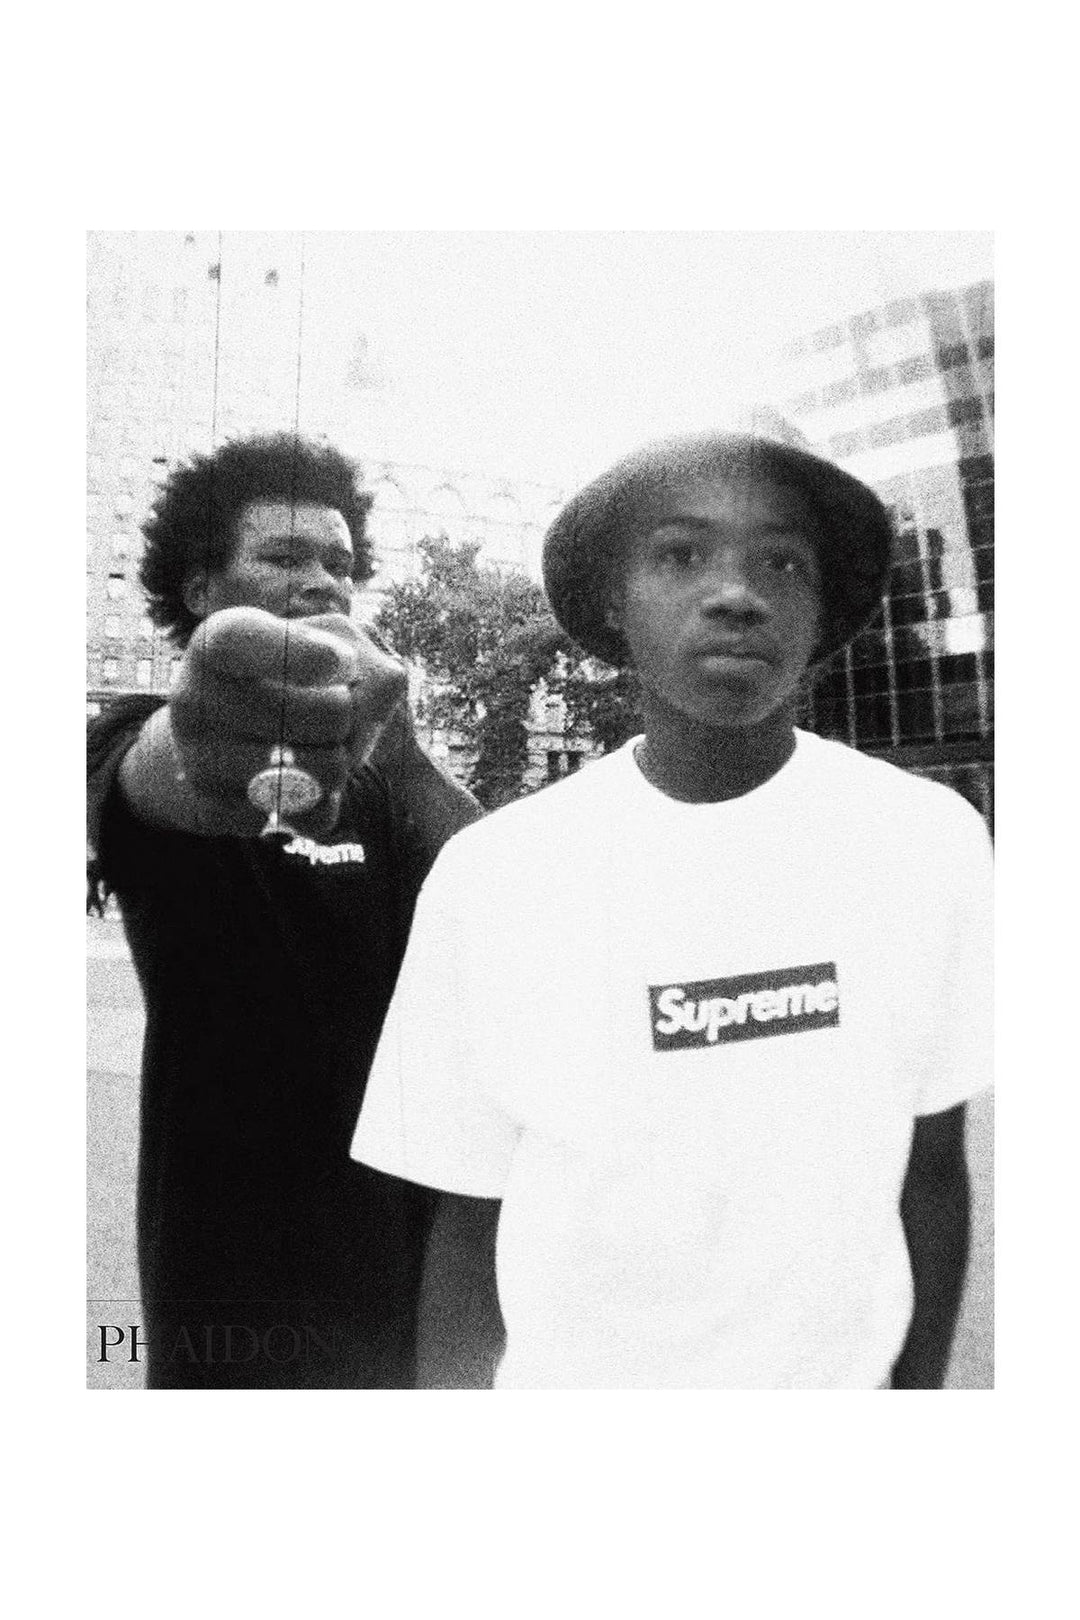 Supreme – By Phaidon - New Mags - CLT